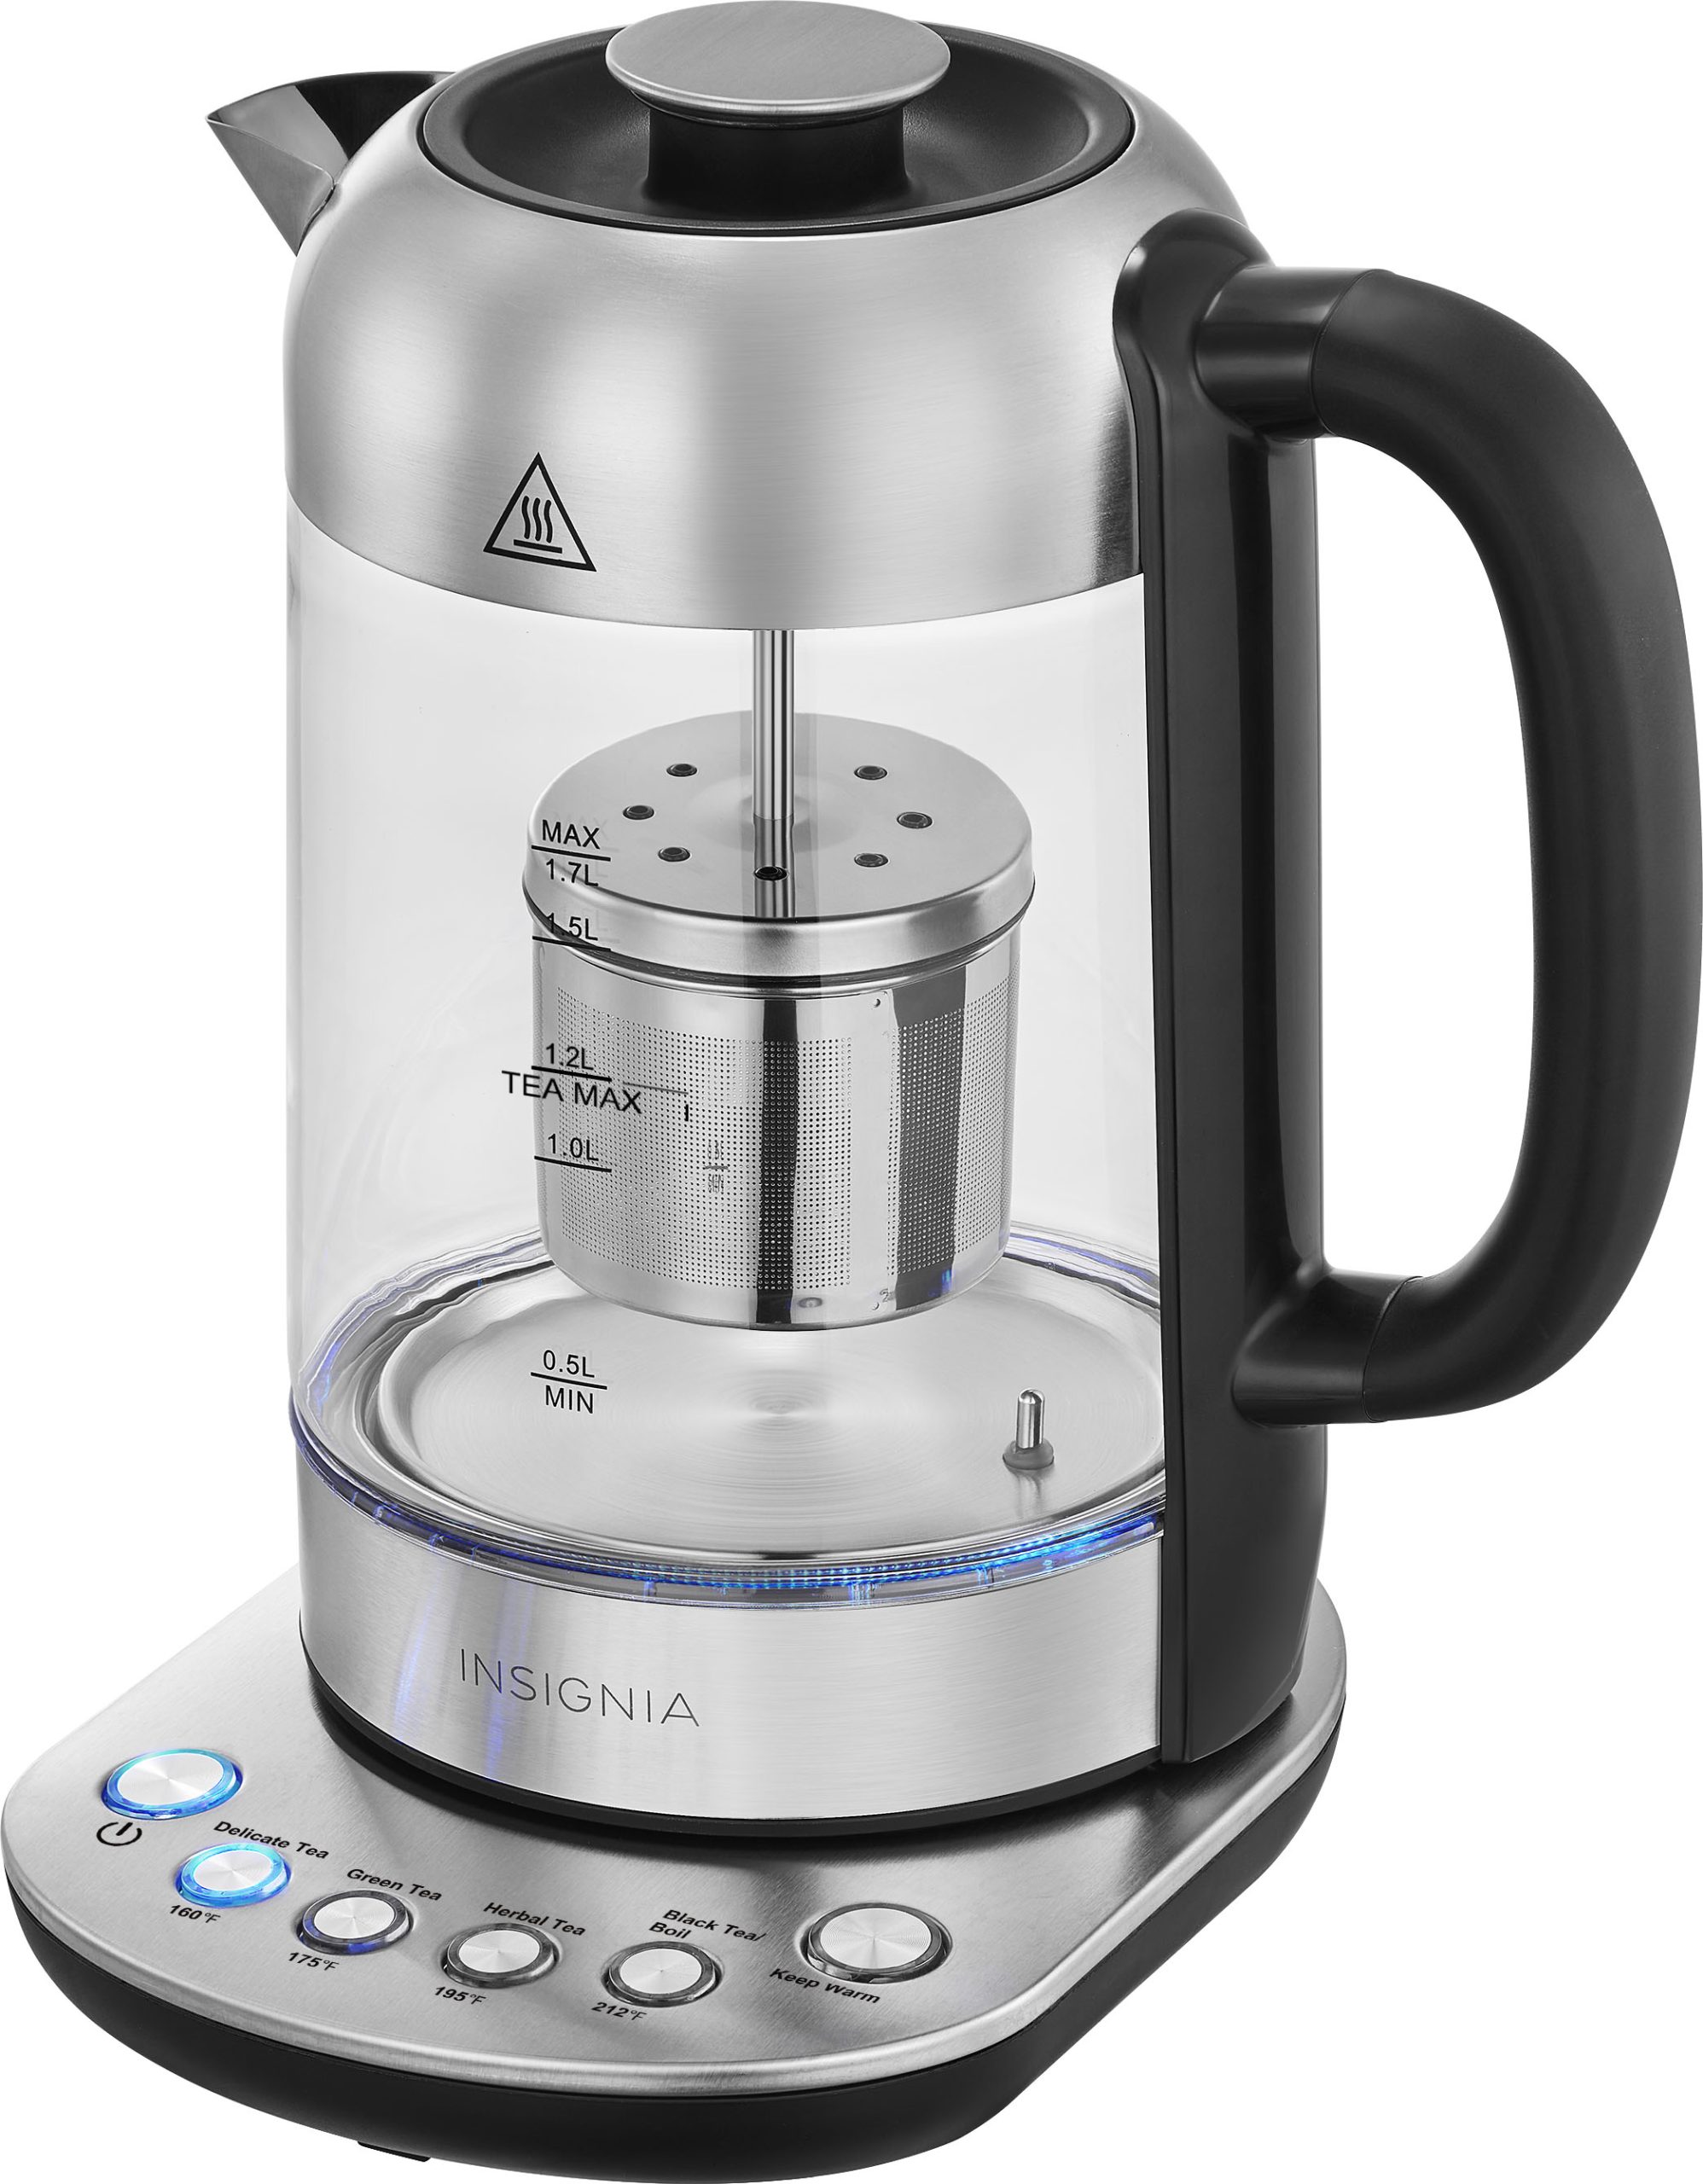 Insignia™ – 1.7 L Electric Glass Kettle with Tea Infuser – Clear/Stainless Steel – Just $19.99 at Best Buy